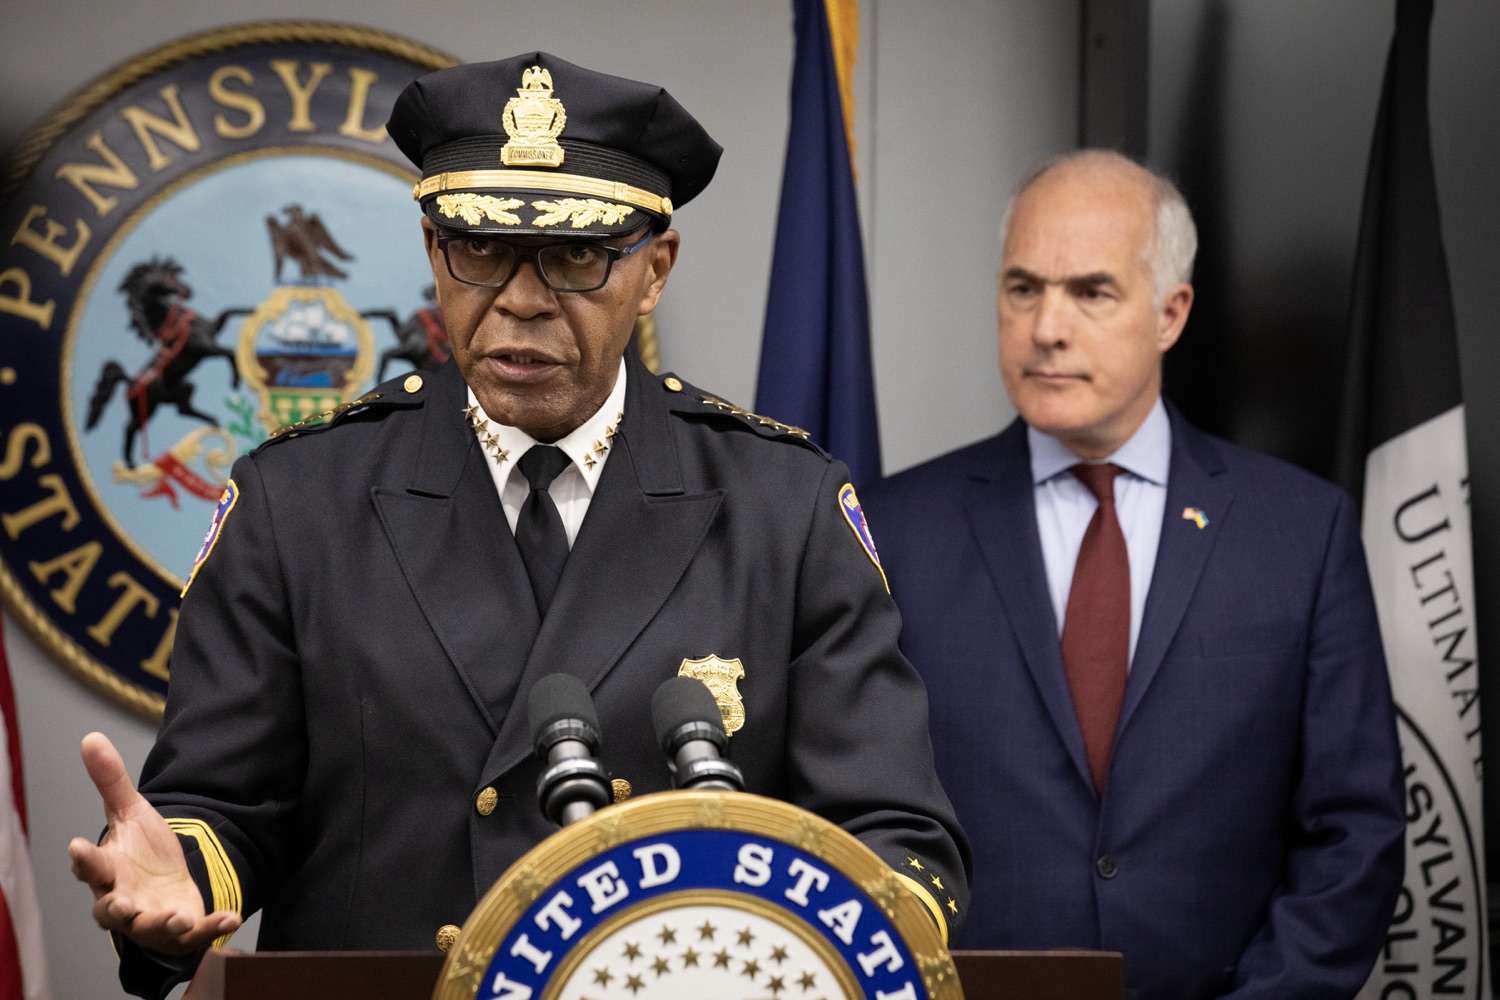 Senator Bob Casey visited Pennsylvania State Police Headquarters to discuss his proposed Stop Fentanyl at the Border Act. Pictured here is Harrisburg Chief Carter delivering remarks during the event. Harrisburg, Pennsylvania.<br><a href="https://filesource.amperwave.net/commonwealthofpa/photo/24347_psp_stopFentanyl_JP_15.jpg" target="_blank">⇣ Download Photo</a>